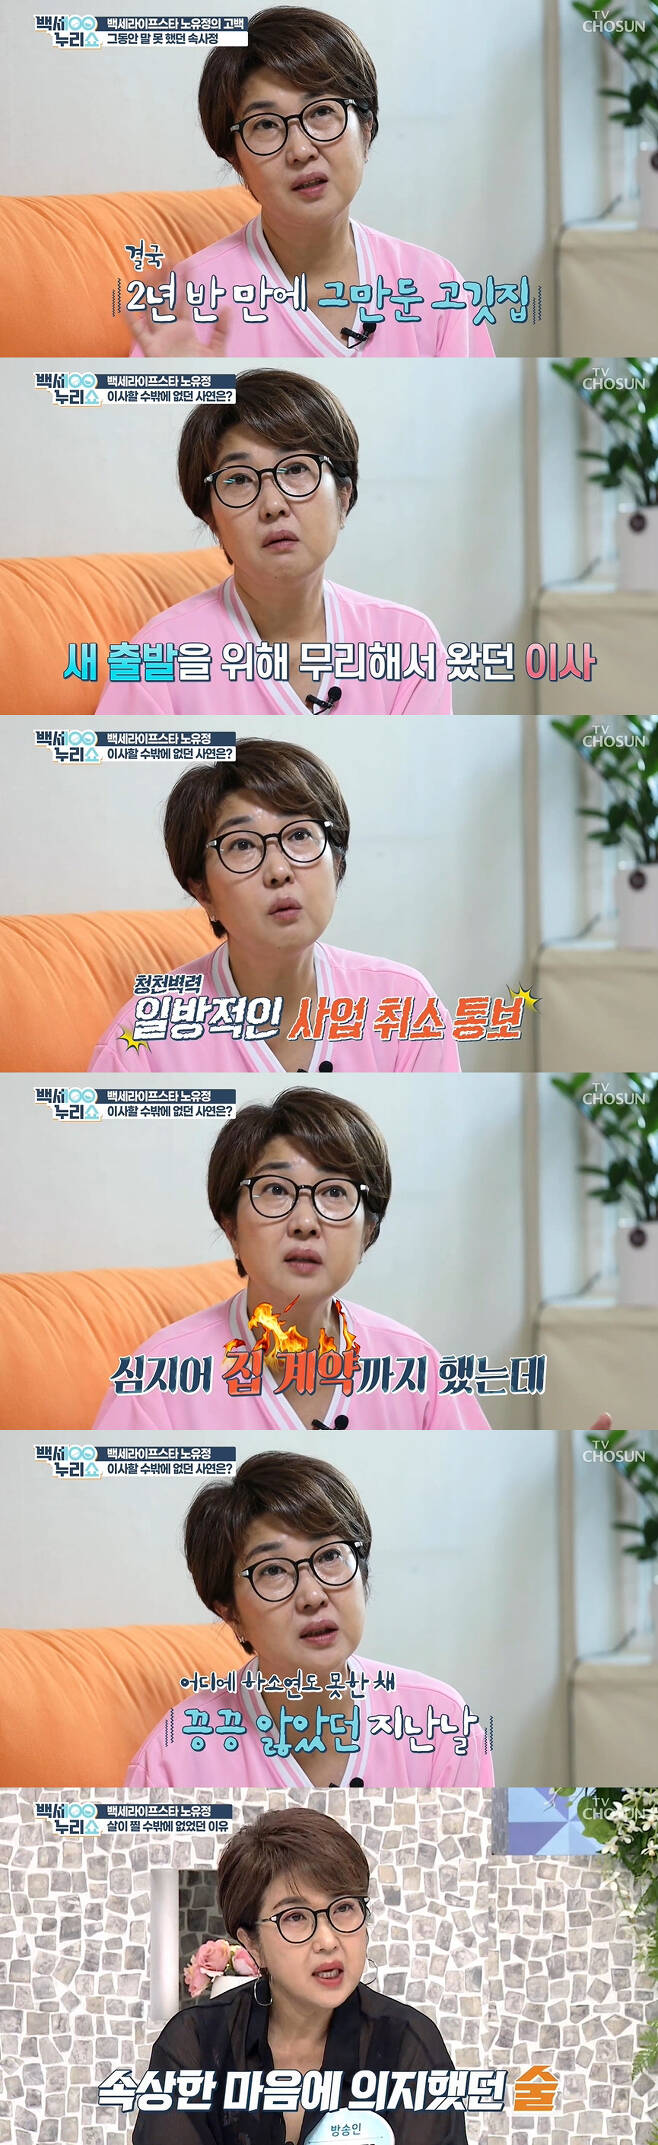 Broadcaster Yu-Jeong Noh has revealed his current status.Yu-Jeong Noh appeared on TV Chosun Baekse Nuri Show broadcast on the 25th and released the house that recently moved.On that day, Yu-Jeong Noh revealed a house where he lives with his son; he said: My daughter is still studying abroad.Thankfully, high school graduated as an honor student, and I received an All-A in the first year of college.  I am not proud of my child, but I am really grateful. Yu-Jeong Noh said, I did not have any income, so I could not send 10 won for a real year. But my daughter collected money and collected money by herself, so I got a license and bought a car.I congratulated her on the car, and she said, She sold and sold the car for us. When she comes later, Ill take a lot of good places.I was so grateful, he said, expressing his affection for his daughter, who grew up without her support.Yu-Jeong Noh said, I actually lived in the house and underground because of my childrens study, and I sold my car, but it was impossible to give up my childrens study because I did not have it.Thats why Ive worked so hard so far. He said, I worked as a salary president at a high school because of my juniors. At first, I worked 14 to 17 hours.It was 24 hours, he said. I started to break my body when I was working so hard.I put water on my knees and then I thought I could not do it later, so I quit in two and a half years. Yu-Jeong Noh said of the recent move: Someone contacted me and asked me to do something like a home shopping on YouTube, and I wanted to be better than going and washing dishes.So I decided to move because I could not save anything because I could walk around without a car because I was just behind the place where the office lives now, but I decided not to move three days before the move. I was so absurd. I thought about it, planned it, signed a house, and said, What if I do not move tomorrow, I do not do it?So I had too much heartache for 10 days. I did not see the way ahead. Yu-Jeong Noh, who was upset and relied on alcohol, said, I drank three bottles of shochu a day, and since then, my stomach has increased since last year.I didnt drink since then because I didnt want to. I drink a little a month or two now.